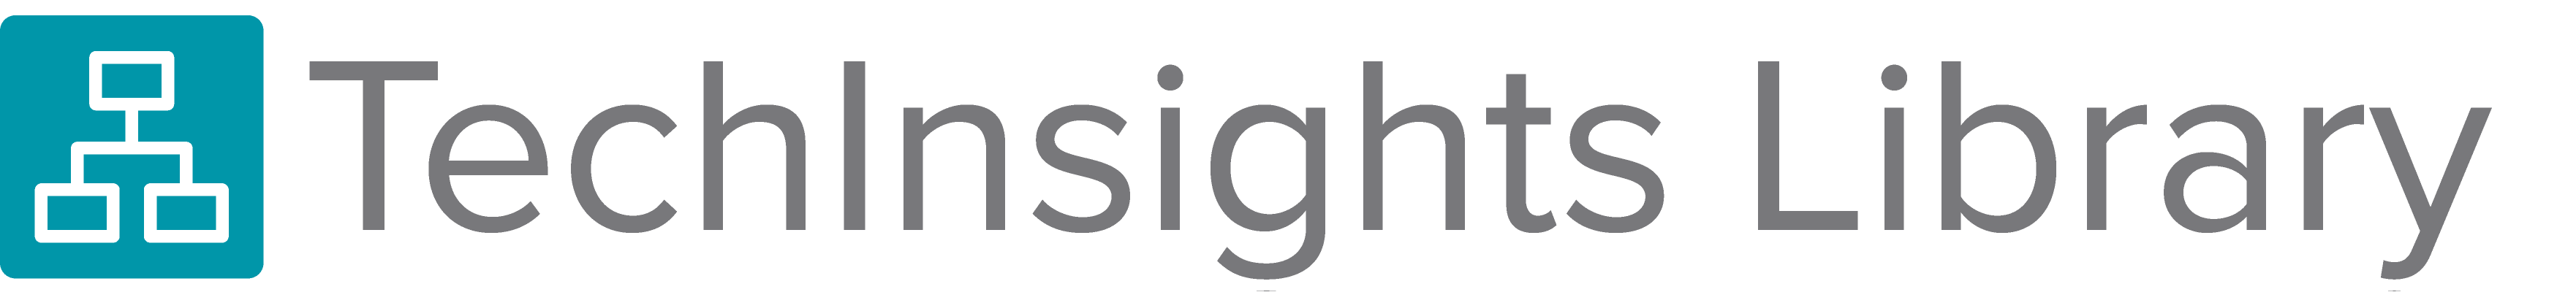 TechInsights Library Subscription